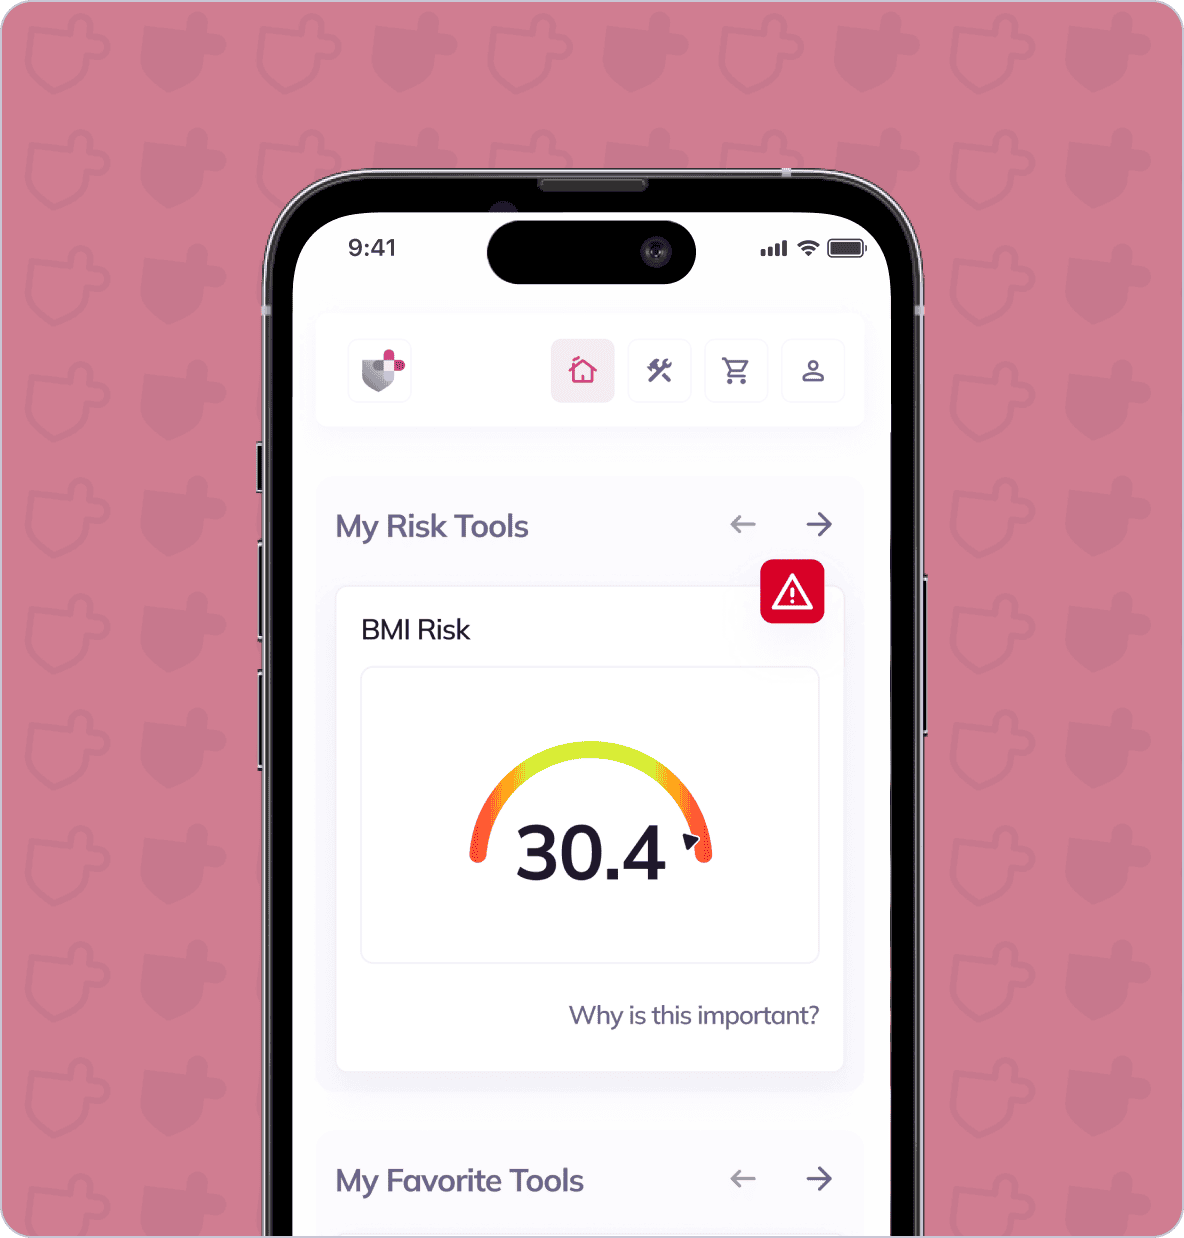 A smartphone screen displays a health app with a BMI Risk tool showing a BMI of 30.4, indicated in a risk category. The background has a pattern of shield icons.